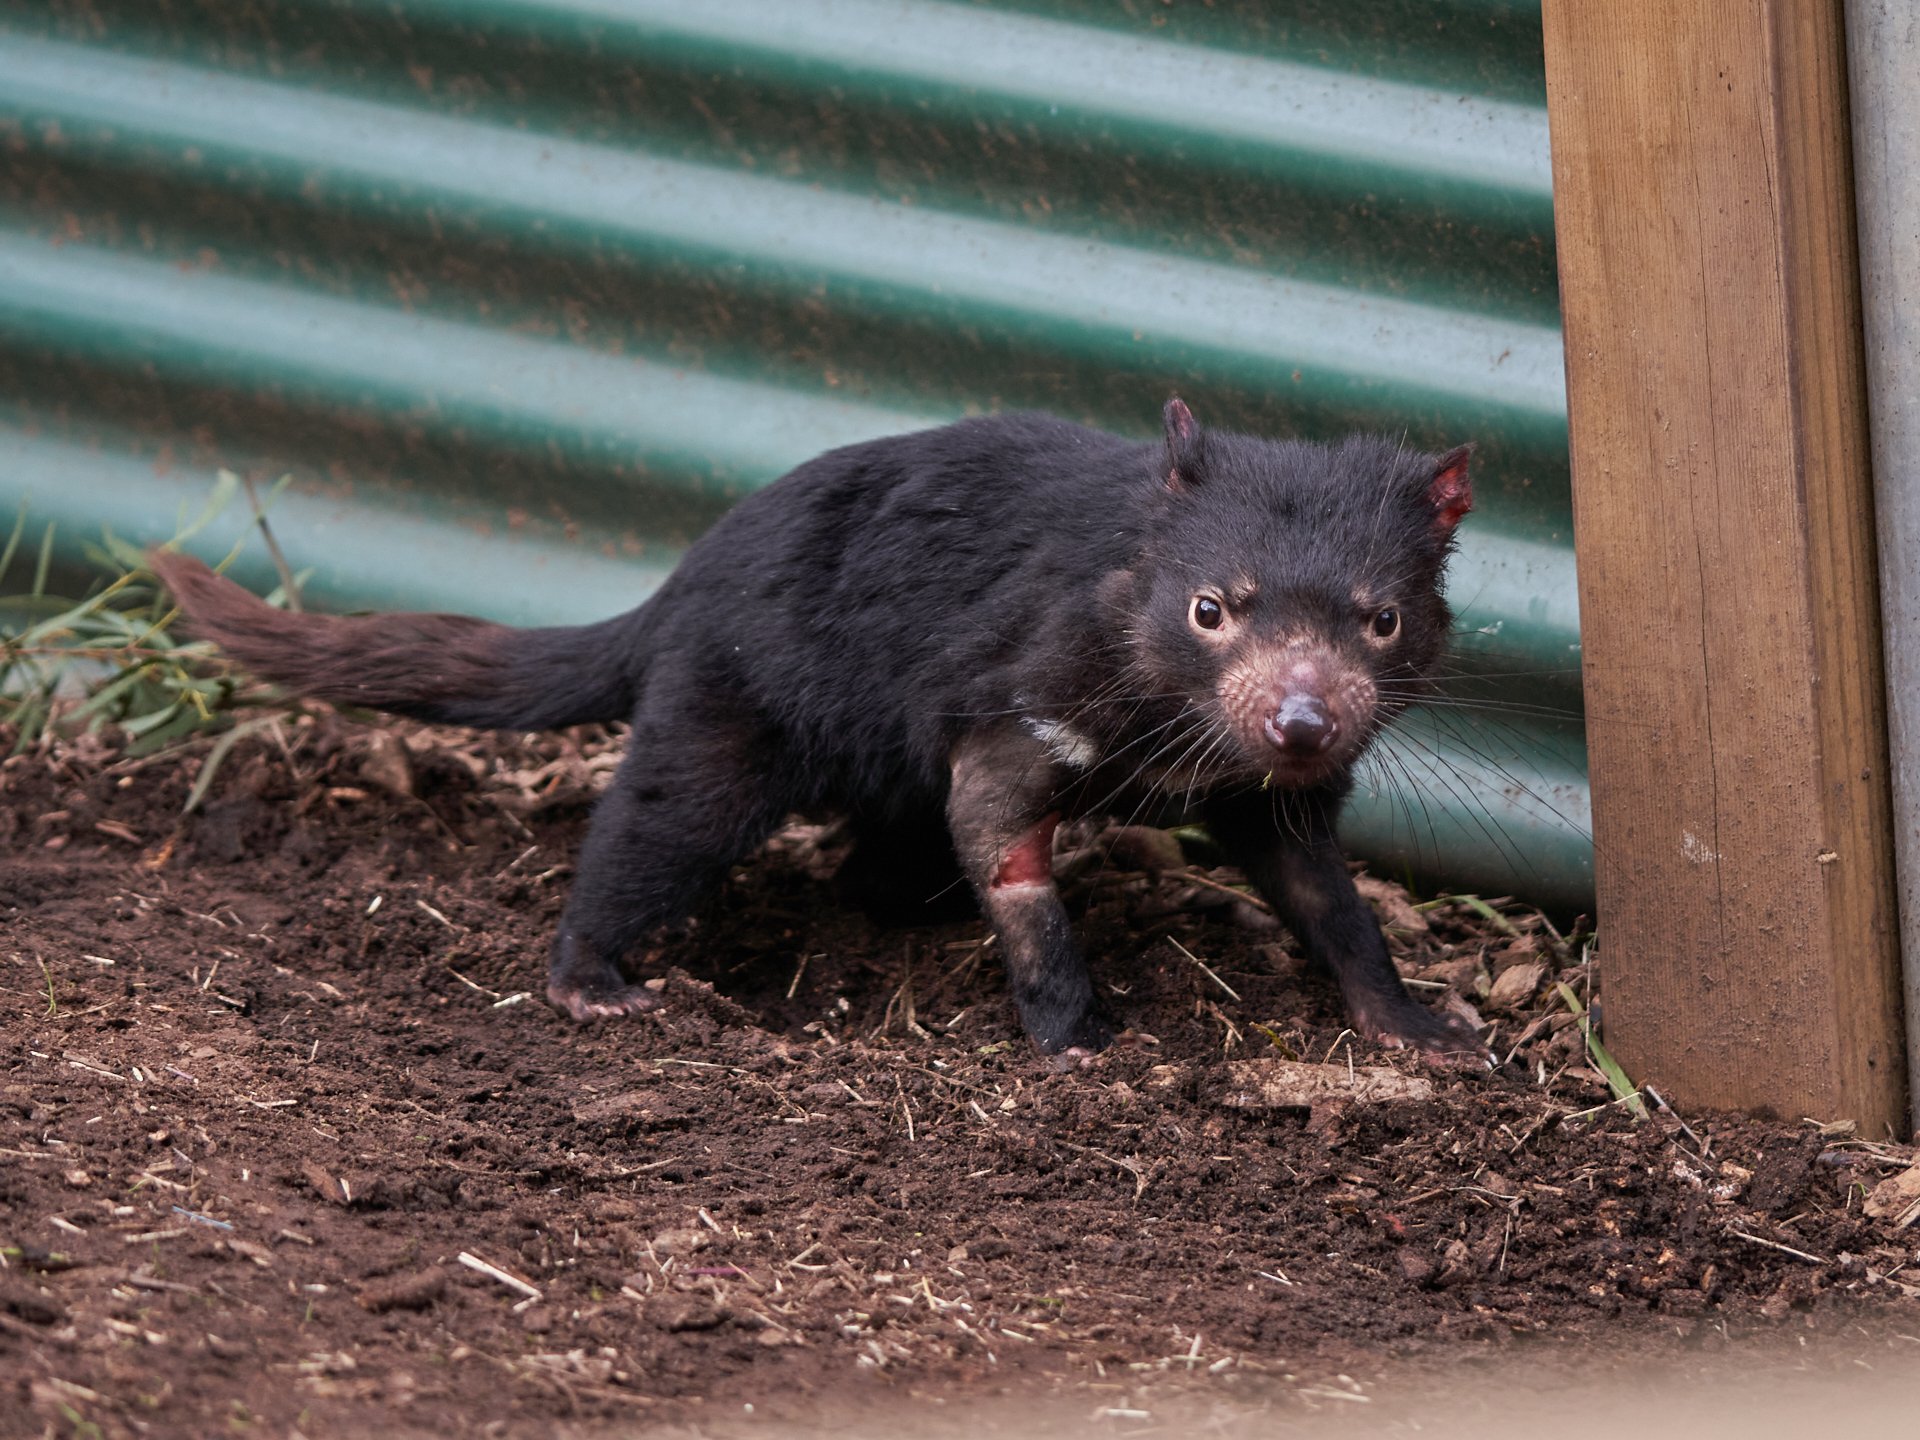 The Tasmanian Devil has a Bite That Can Do Serious Damage